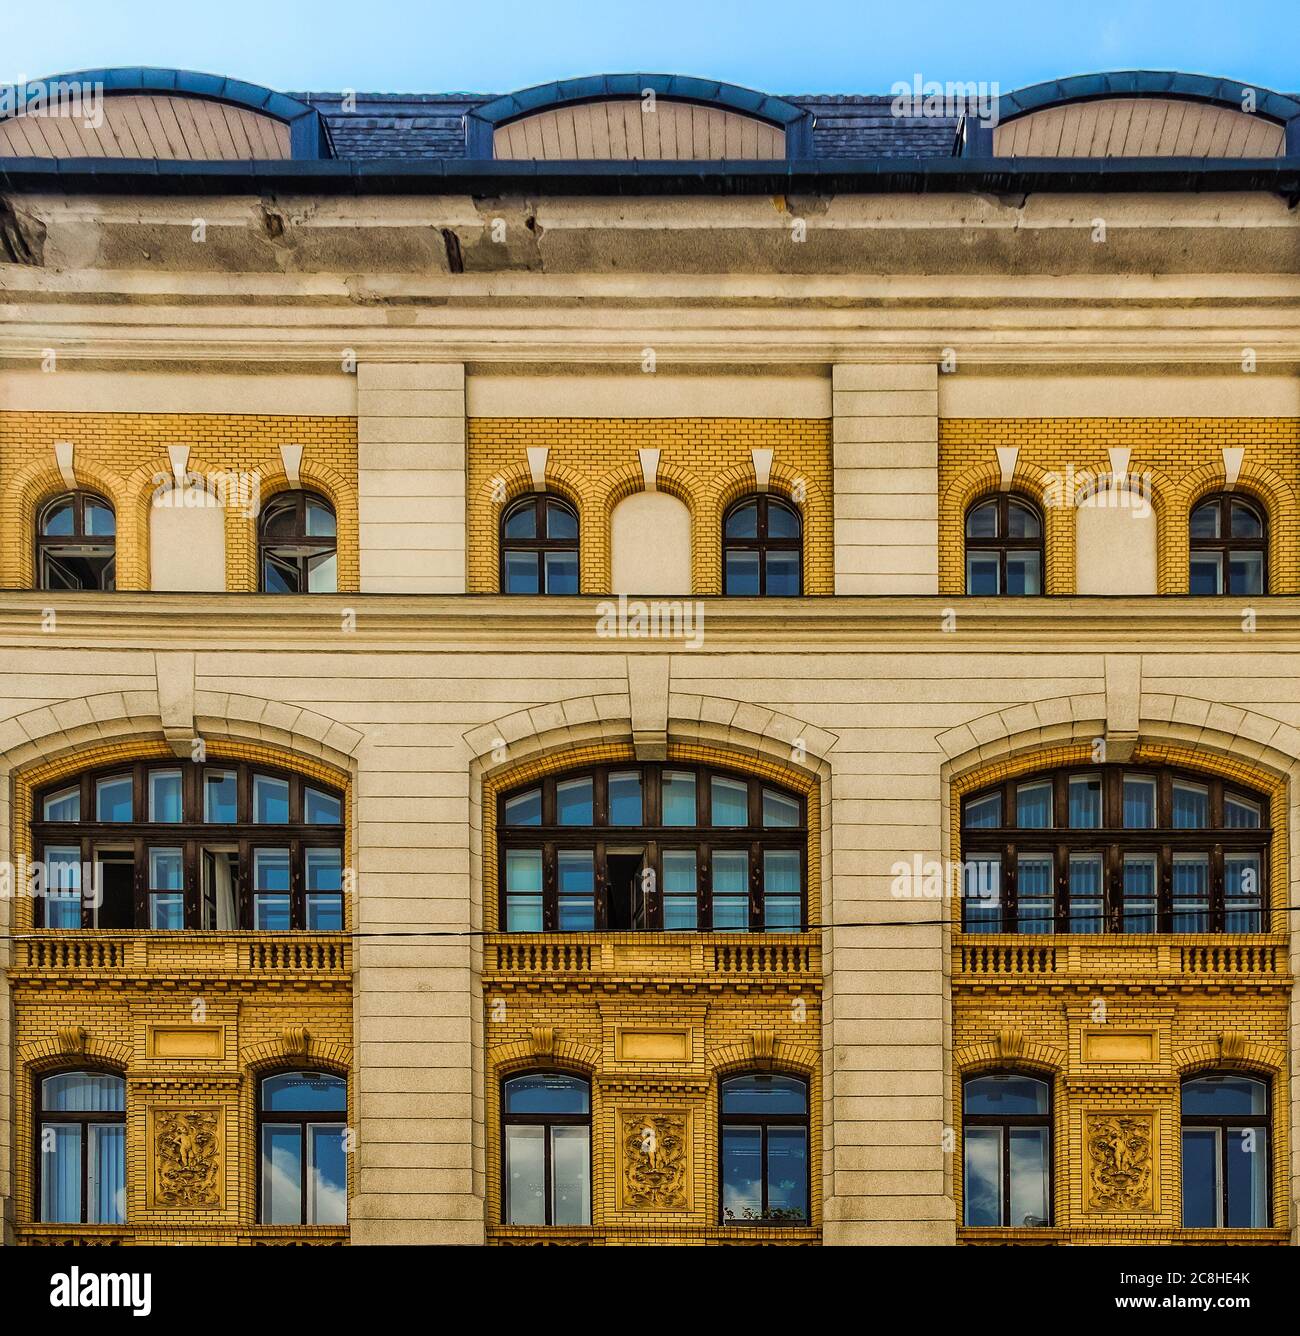 Hungary, Budapest, Aug 2019, close up of a facade of a yellow building Stock Photo